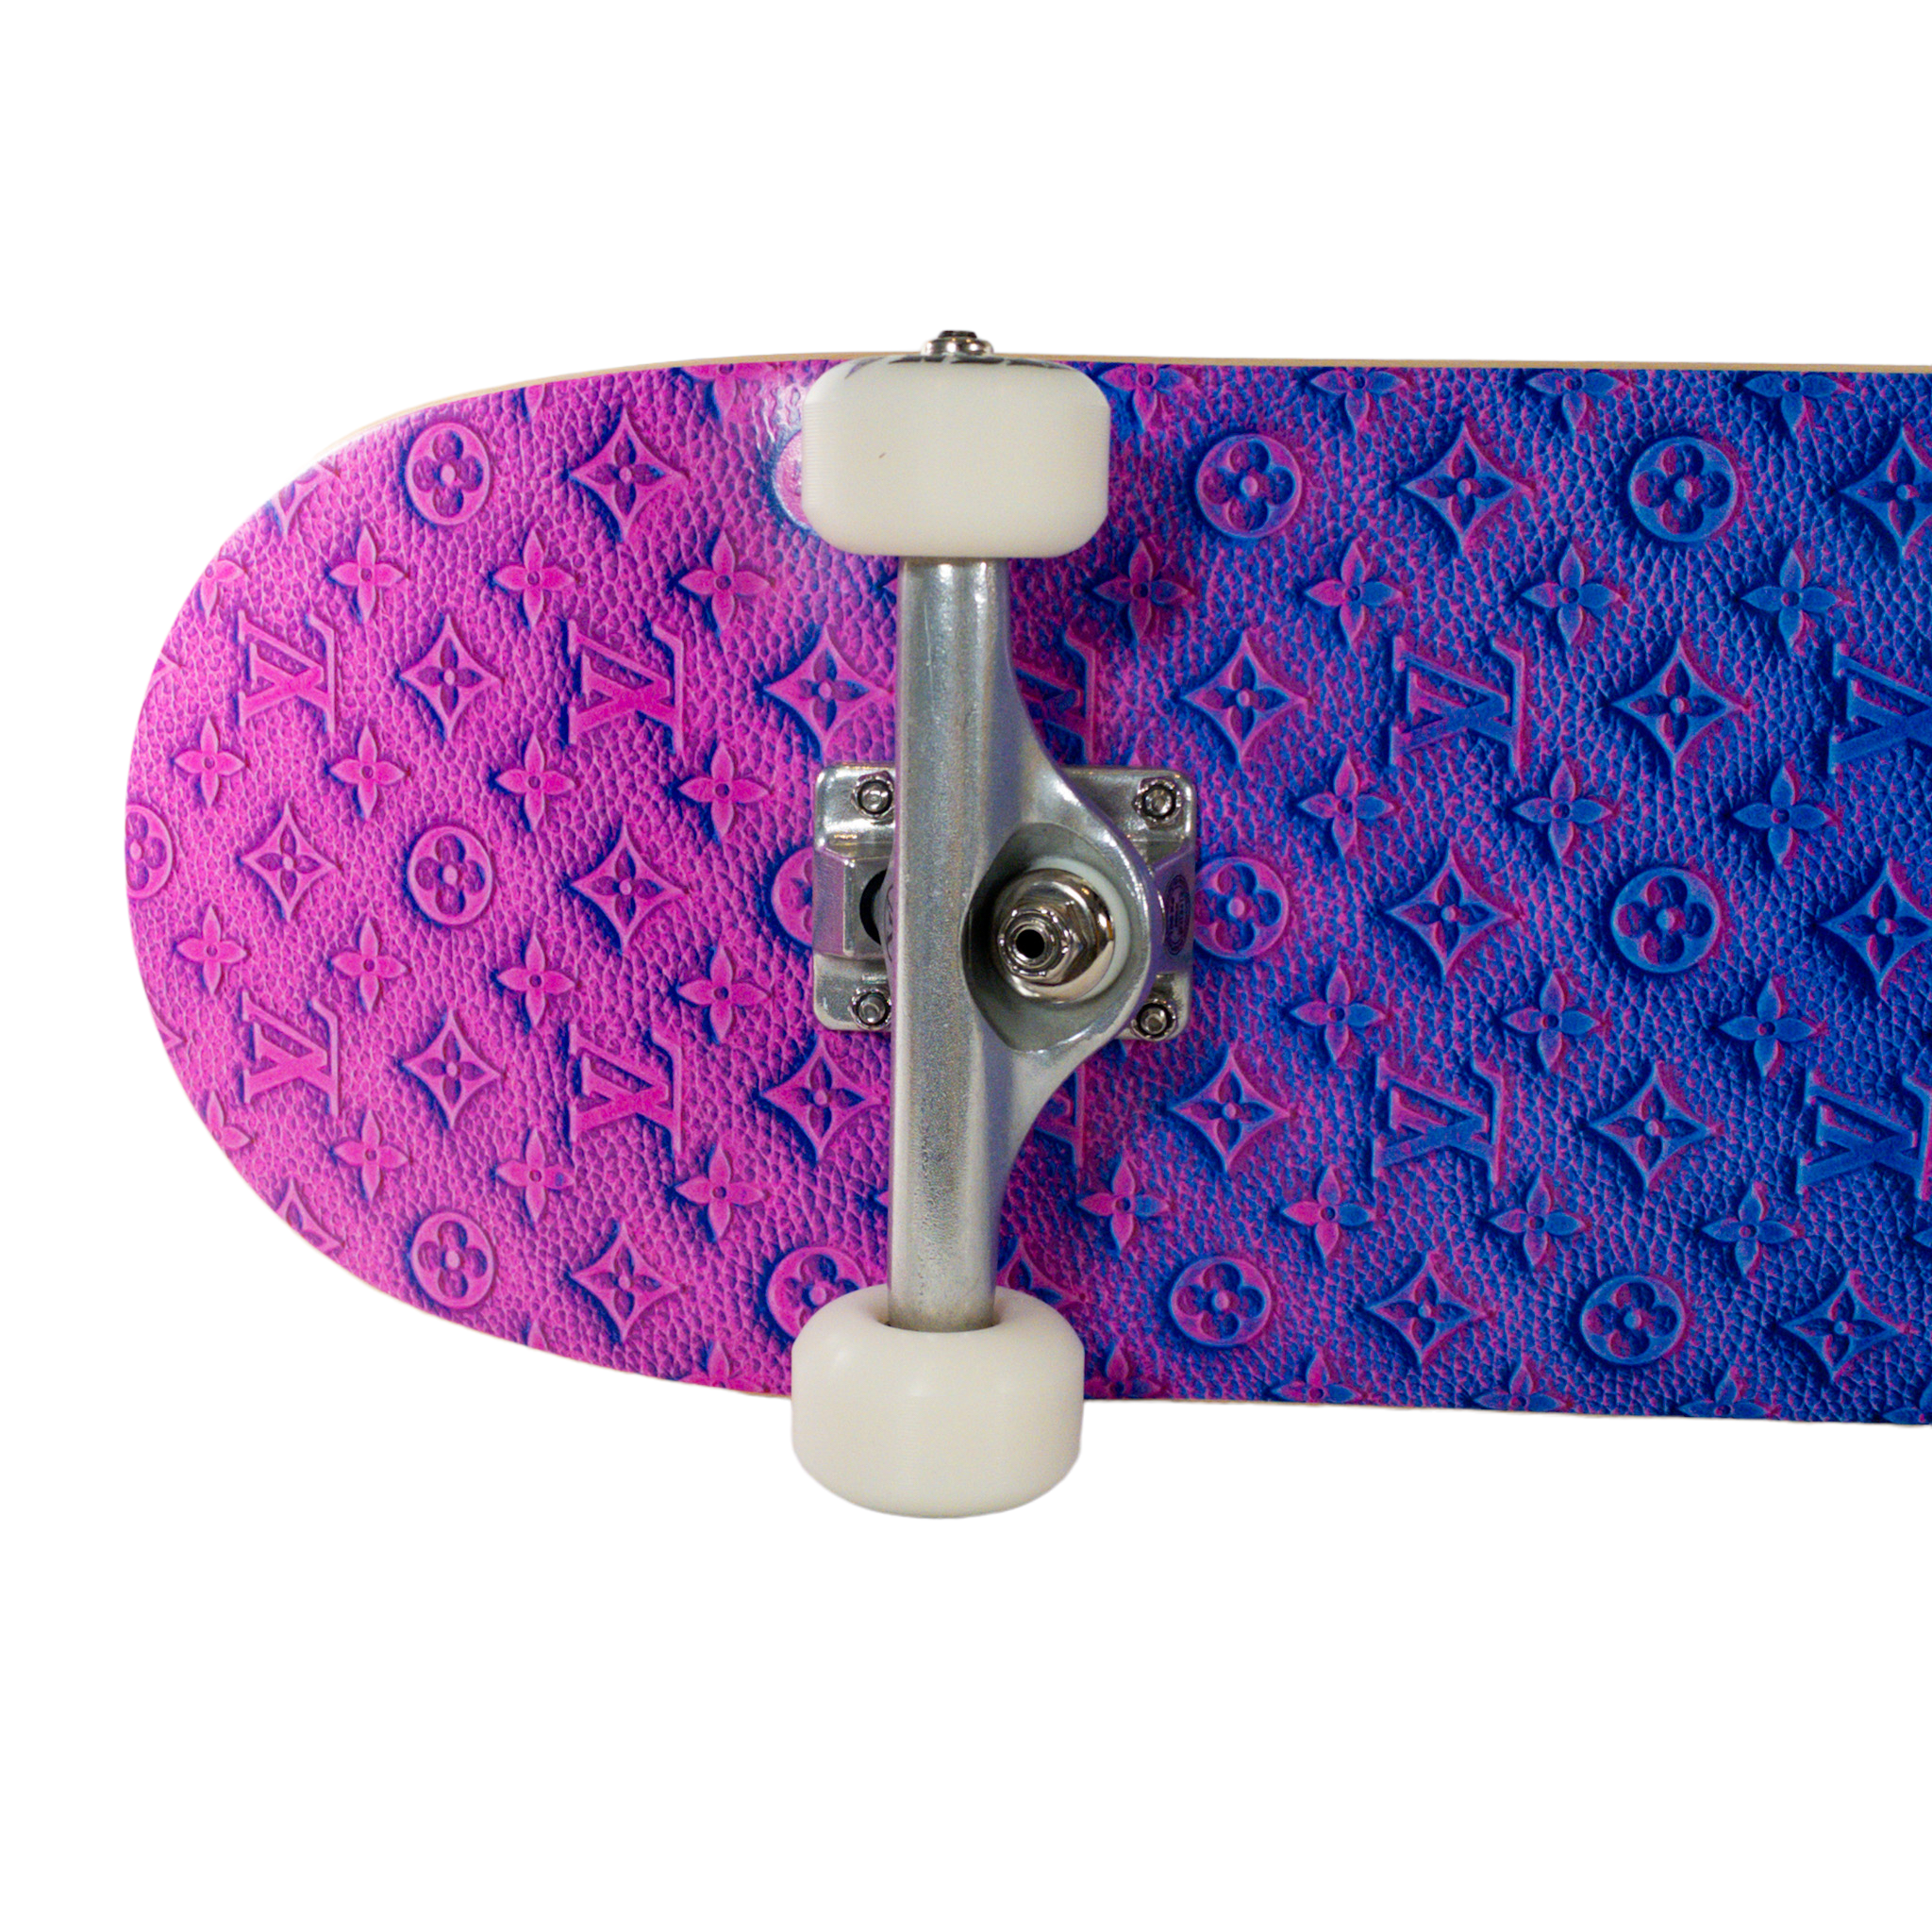 Louis Vuitton & Virgil Abloh, Multicolor Watercolor Monogram Wood,  Aluminum, and Polymer Skateboard, 2021, Modern Collectibles, 2022